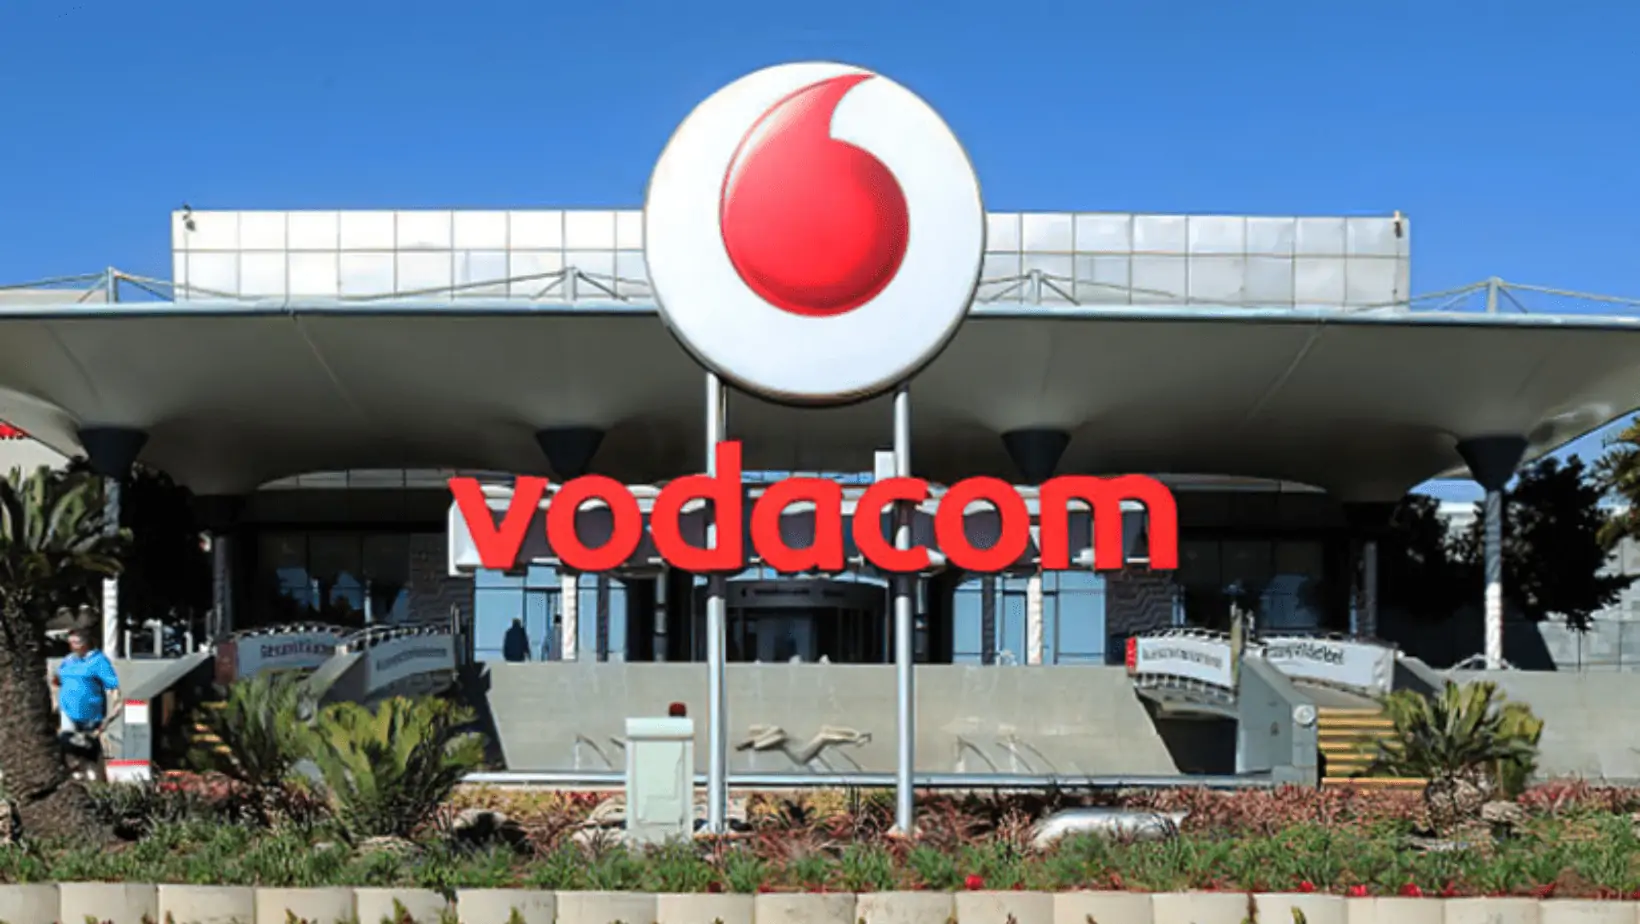 Vodacom’s Soaring Growth and Digital Vision: The Telecom Giant’s Impactful Journey